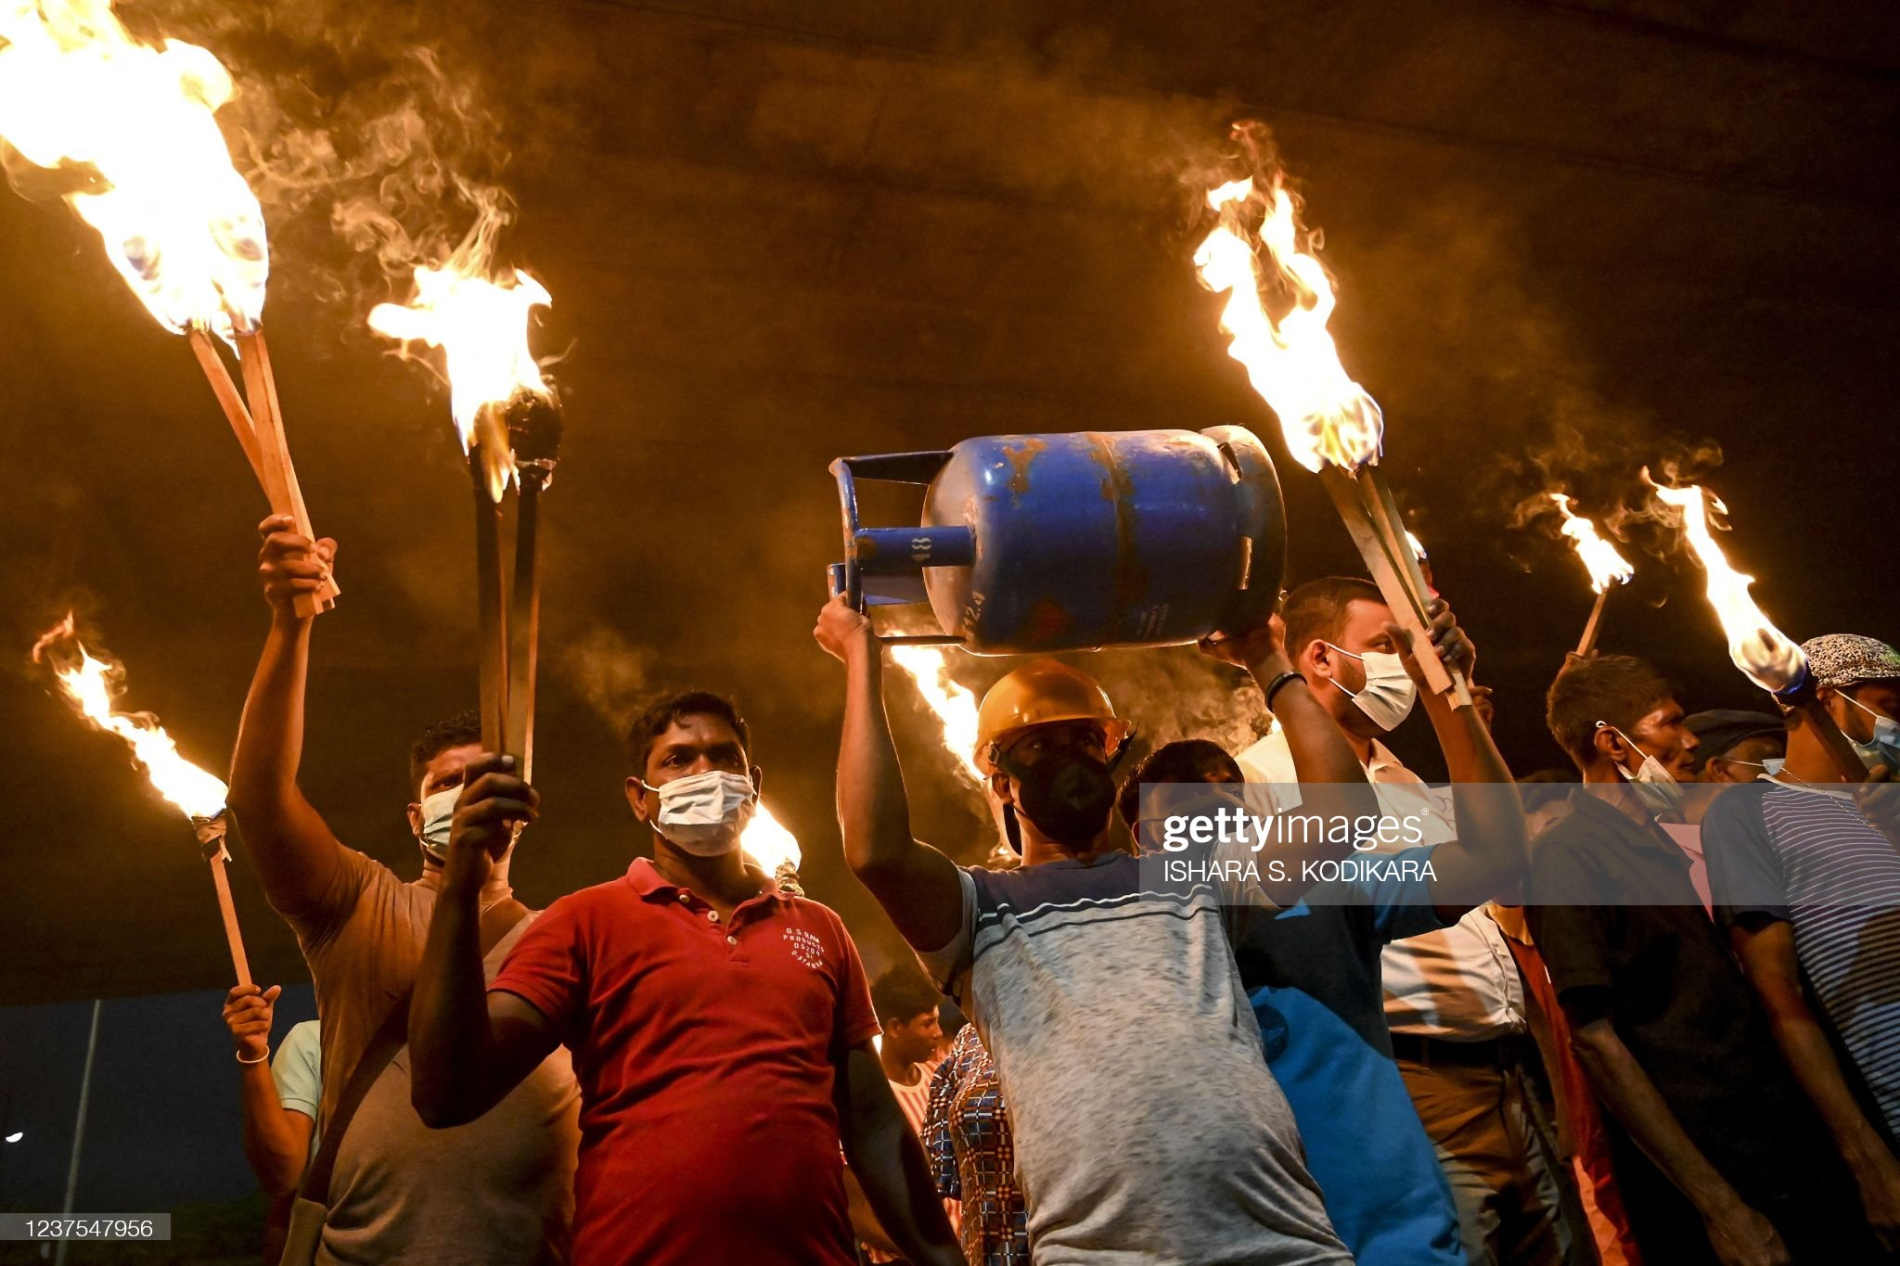 crowd marching with torches in skri lanka